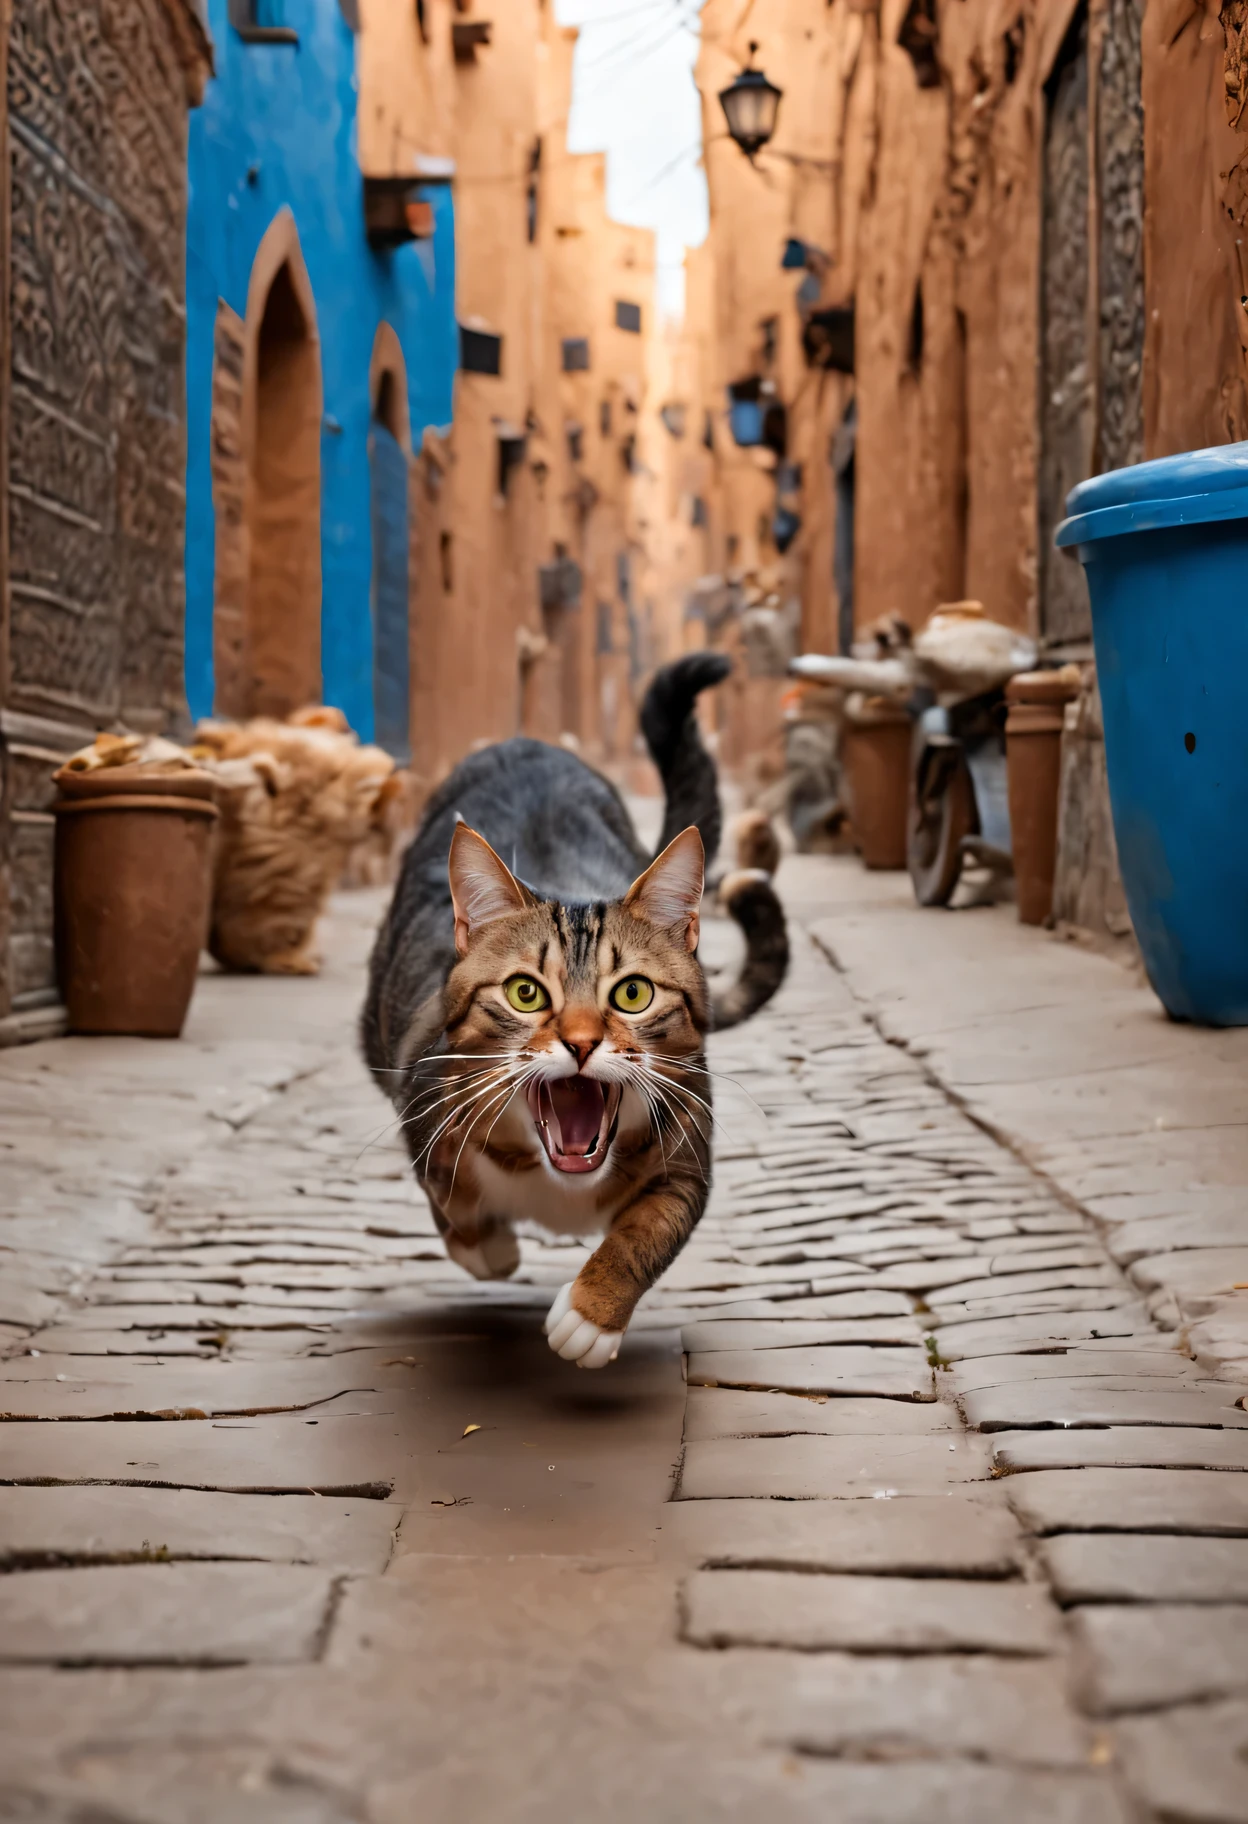 there is a 猫 that is running down the street with Moroccan people chasing it, awesome 猫, 极其逼真的照片, 现实生活中的汤姆和杰瑞, happy 猫, 猫 attacking Marrakech, funny 猫, running 猫, !!! 猫!!!, !!!! 猫!!!!, 高度逼真的照片, 现实生活图片, 超逼真的画面, 超现实的照片, 嘴里塞着偷来的沙丁鱼, 超现实主义的画面